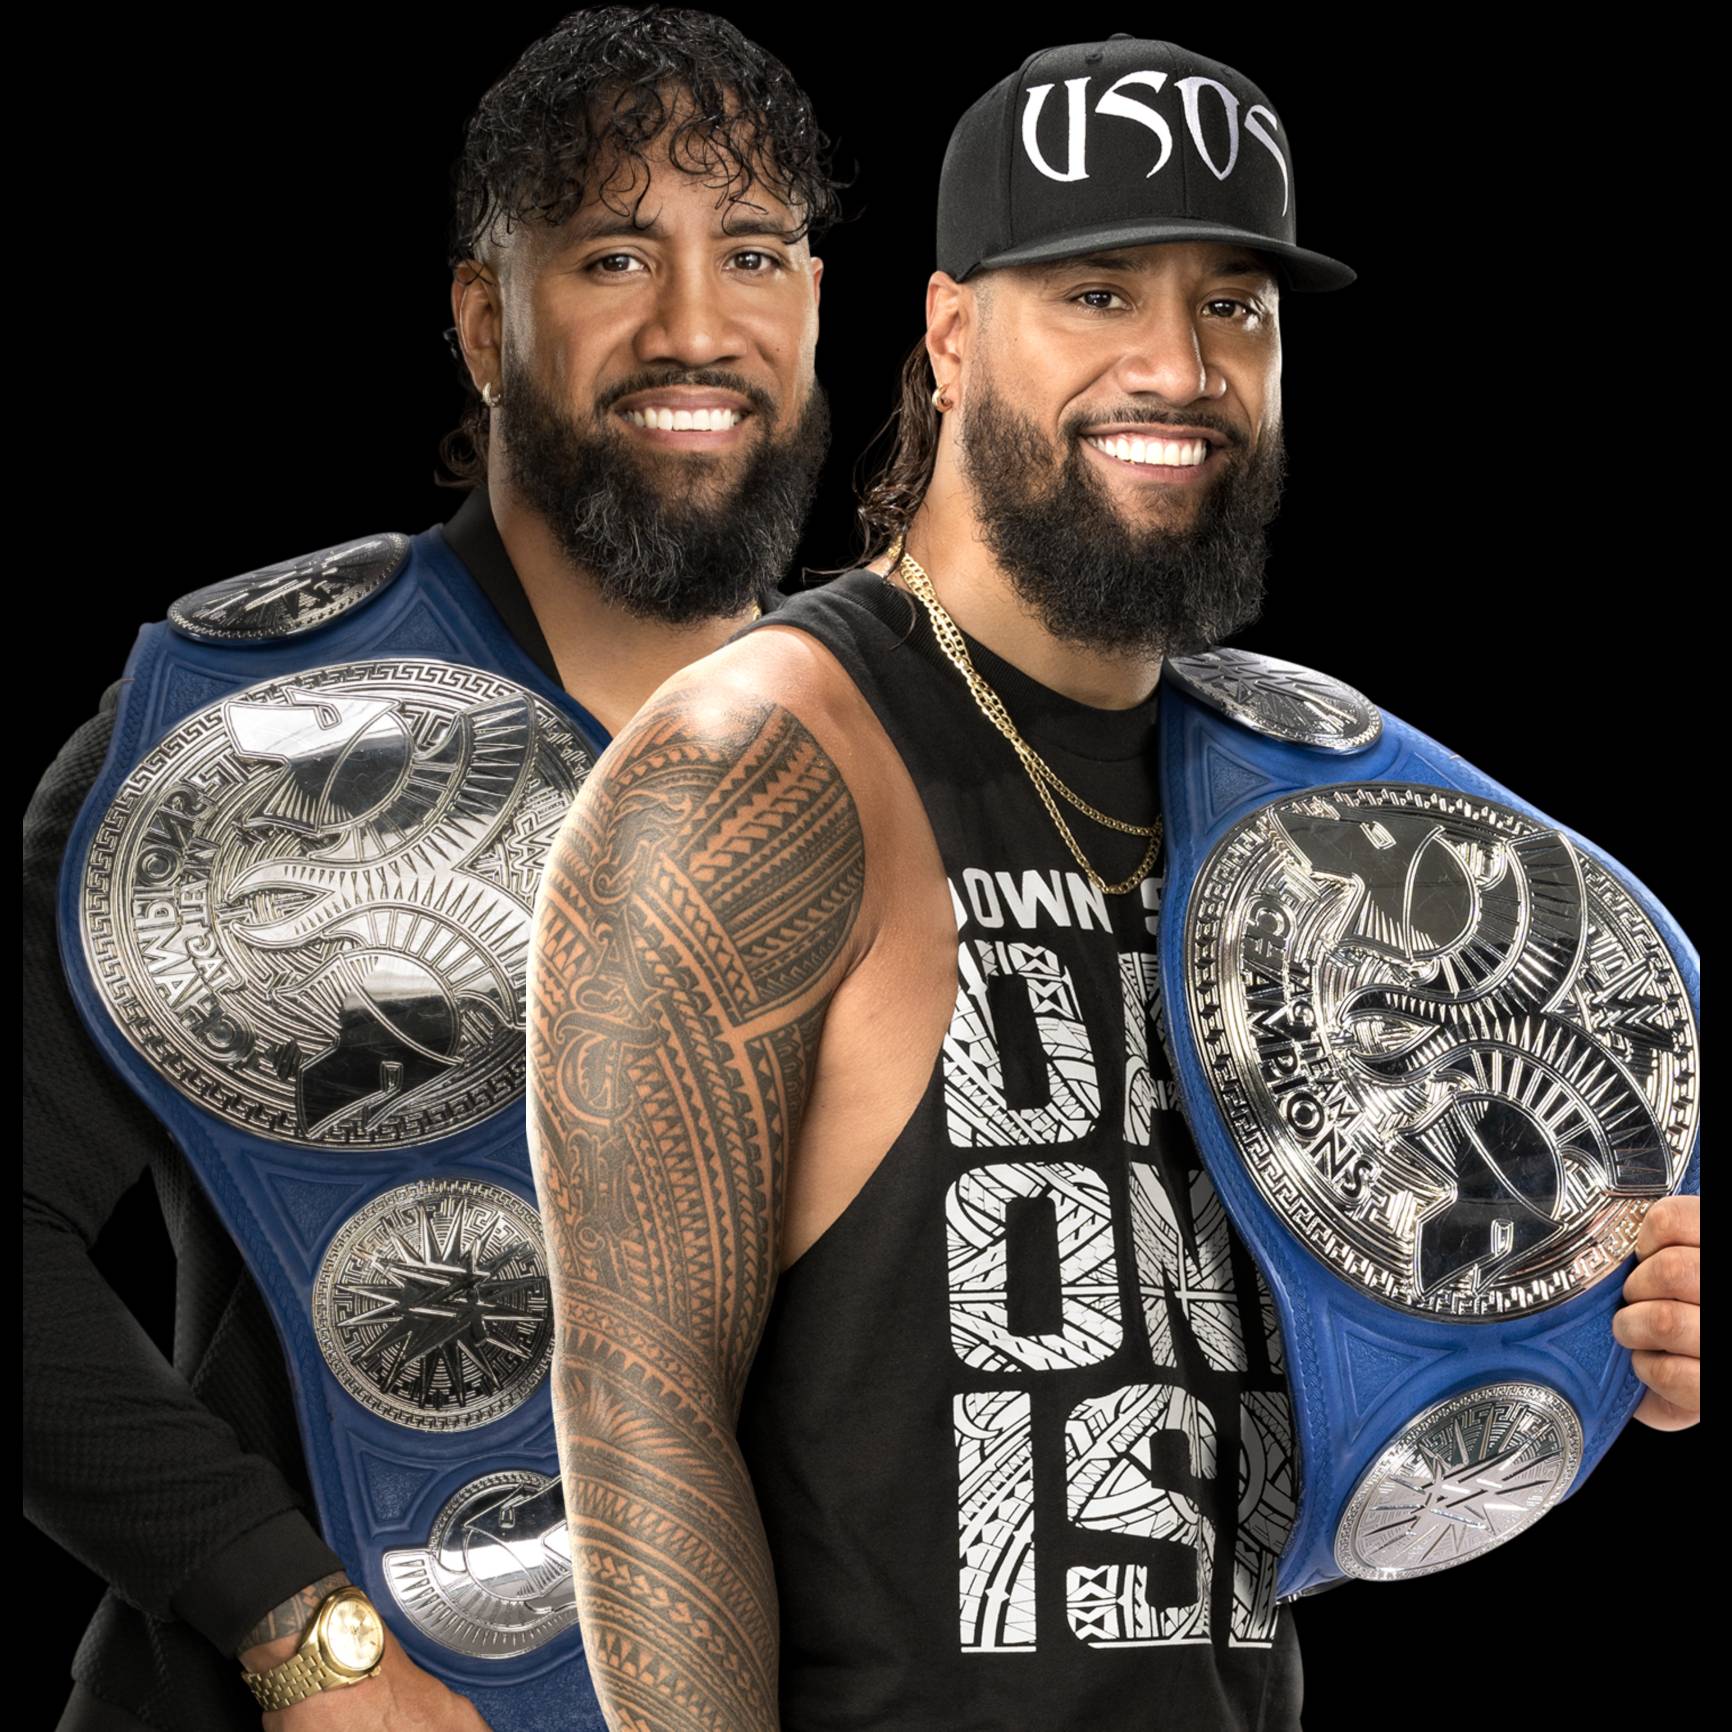 The Usos Tag Team Champions Png 2021 on DeviantArt